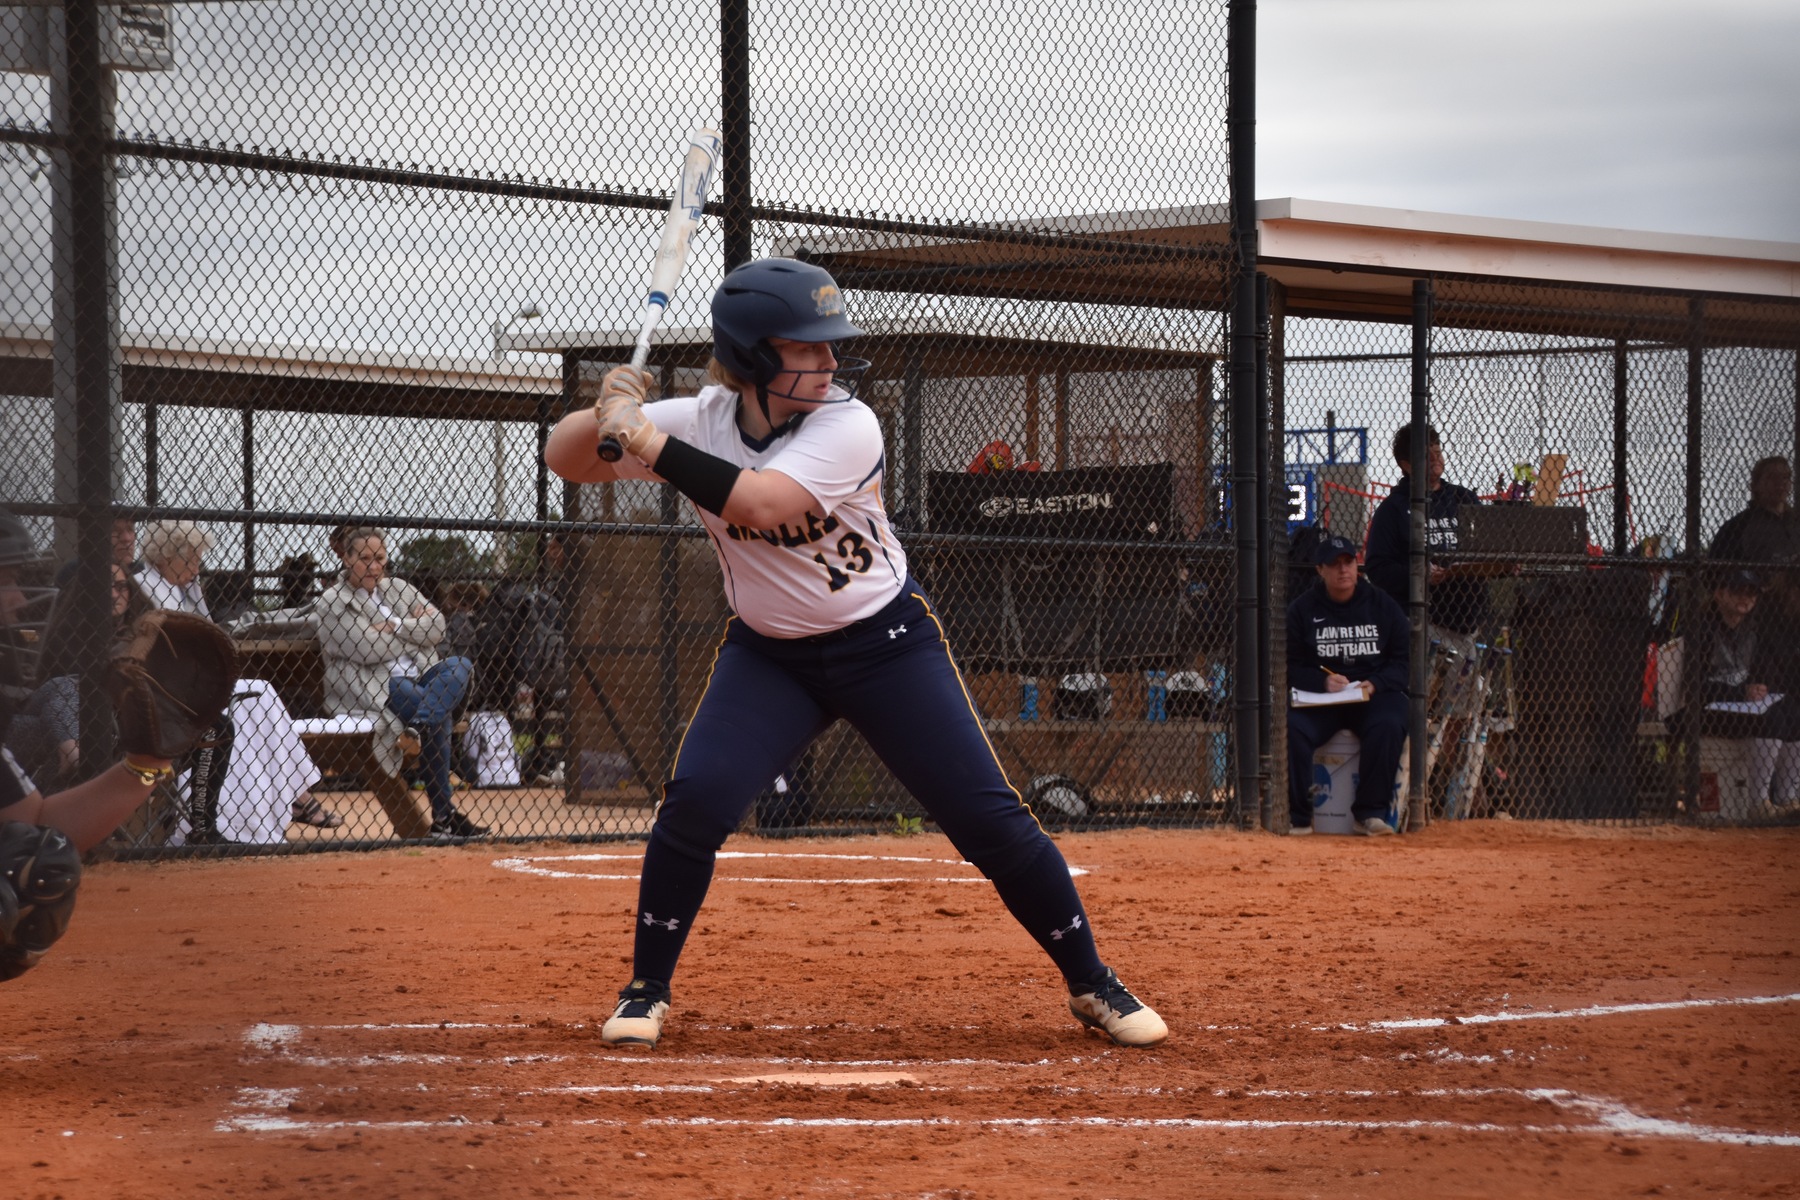 Quinones homers to lead Softball to a split with Westfield in MASCAC action